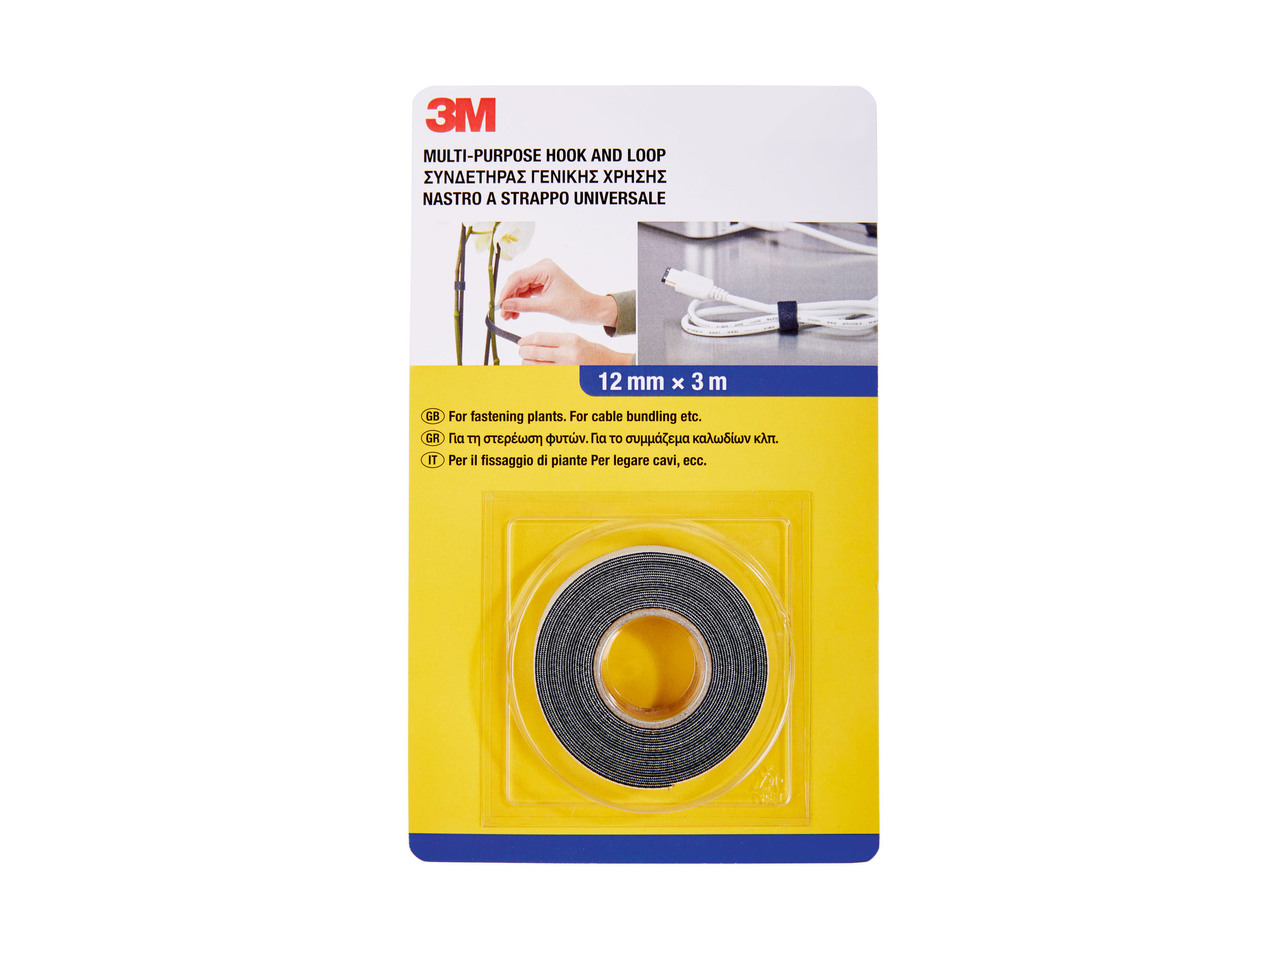 Tape, Pads or Tear-Off Adhesive Strips